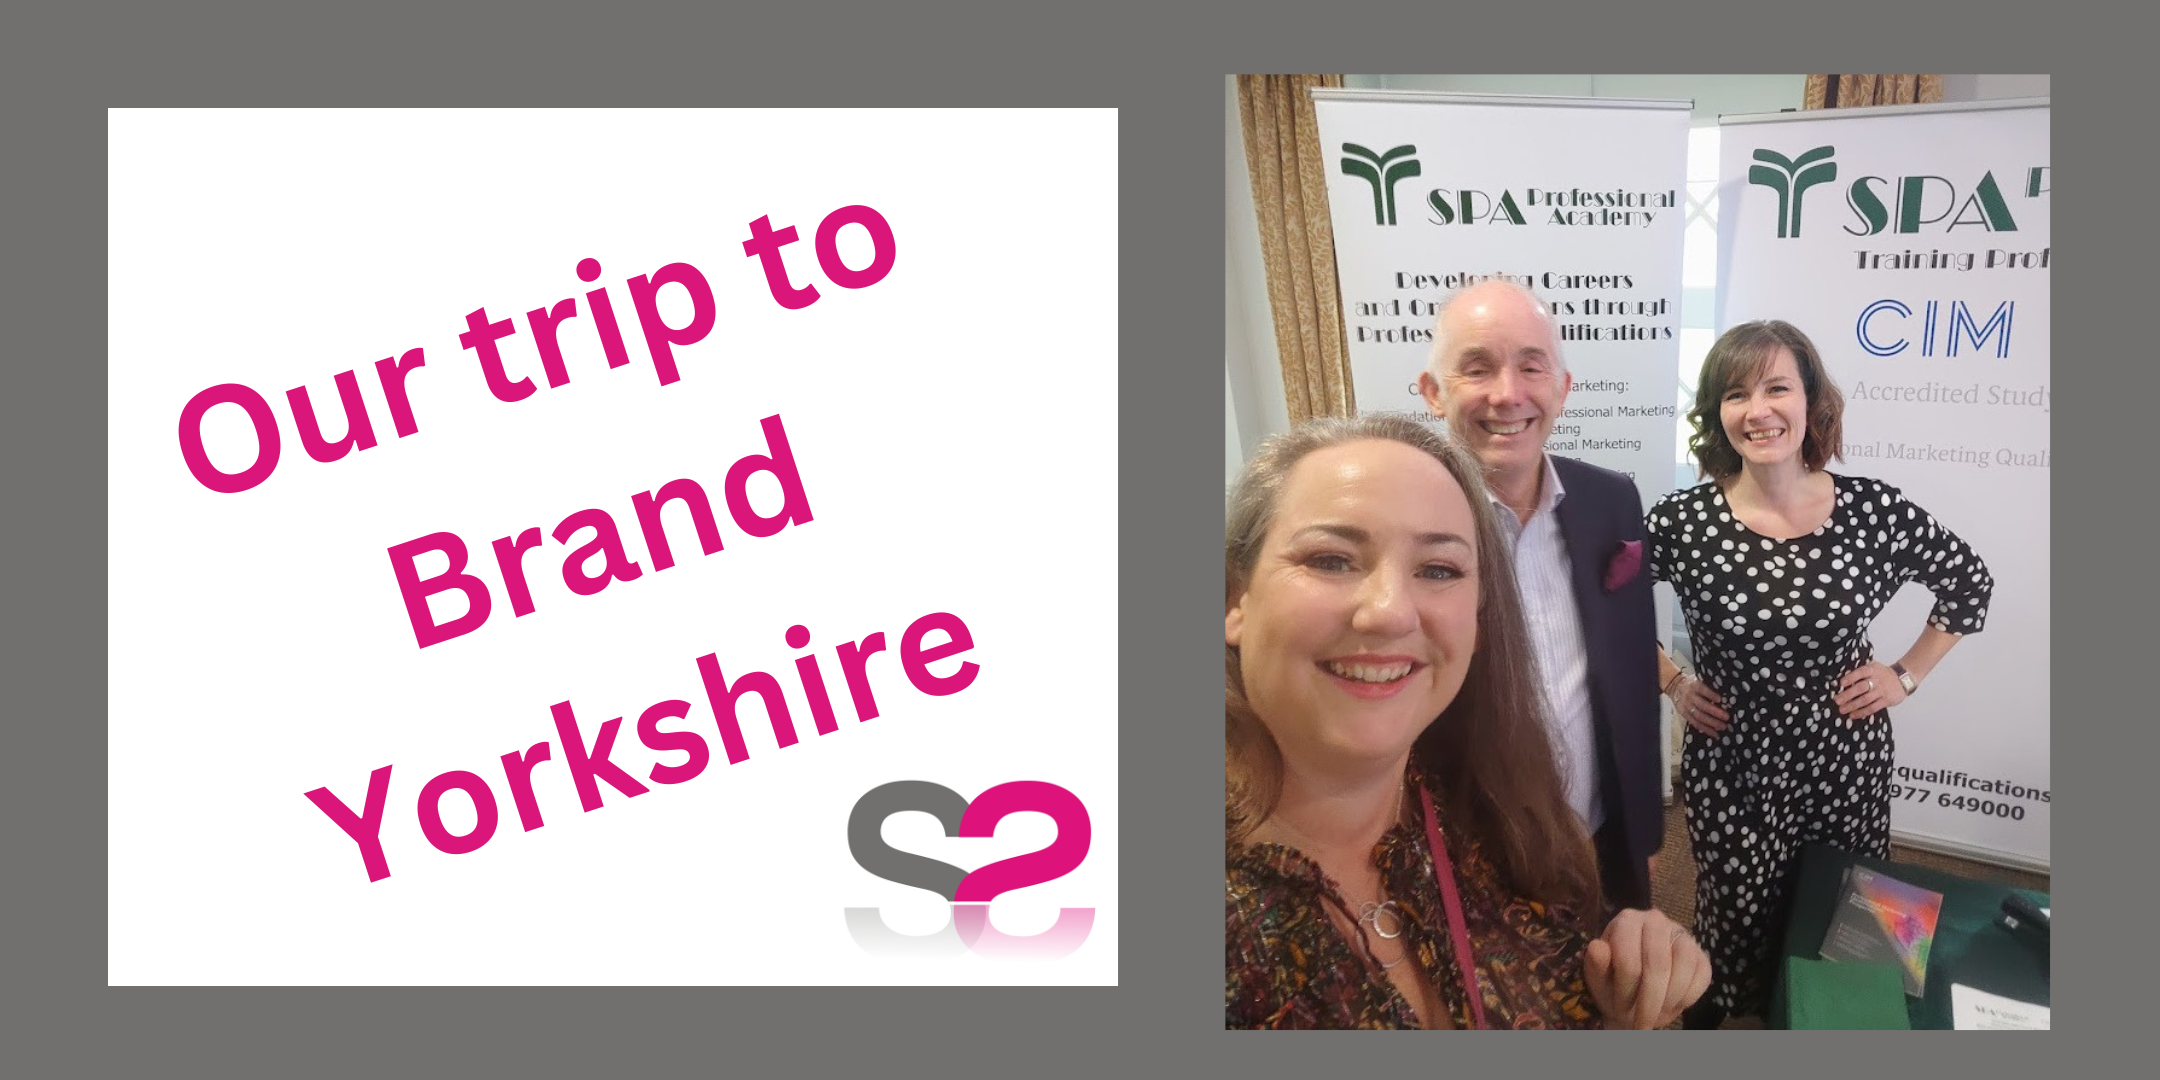 Our trip to Brand Yorkshire in Harrogate